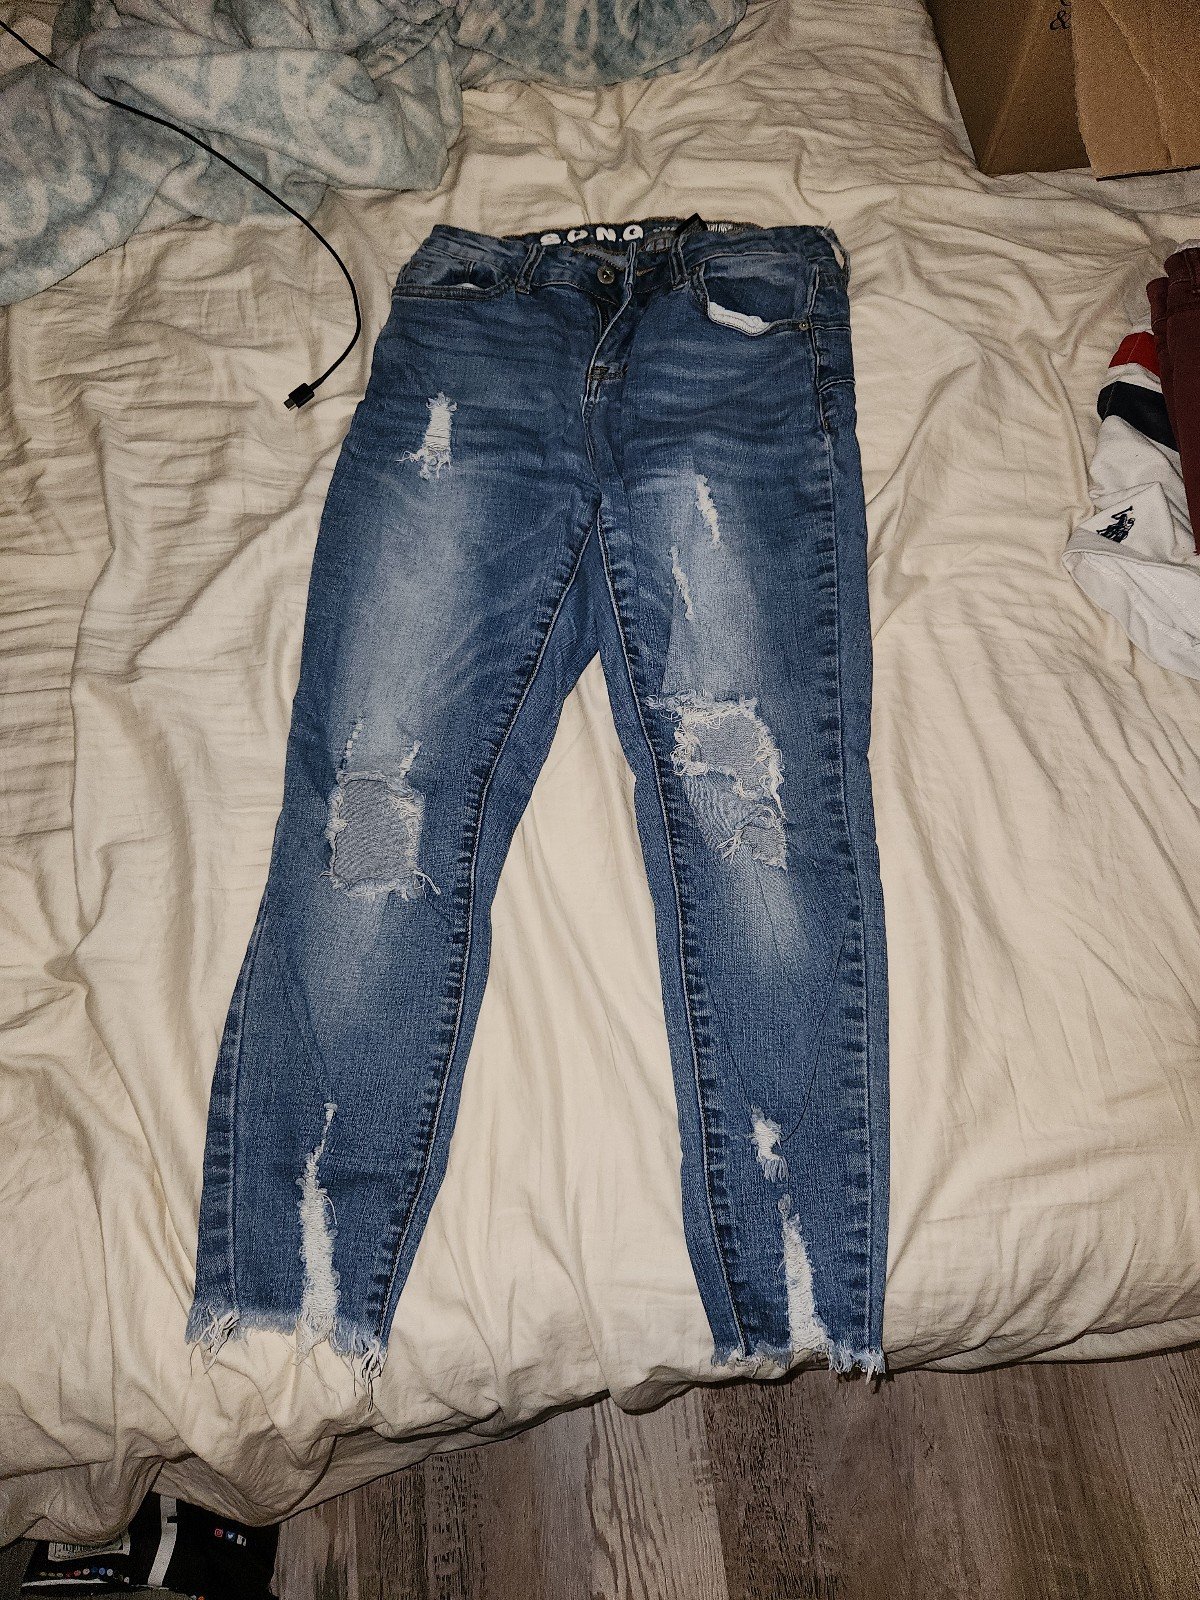 Cheap Jeans /capris lFVIaryMH Everyday Low Prices